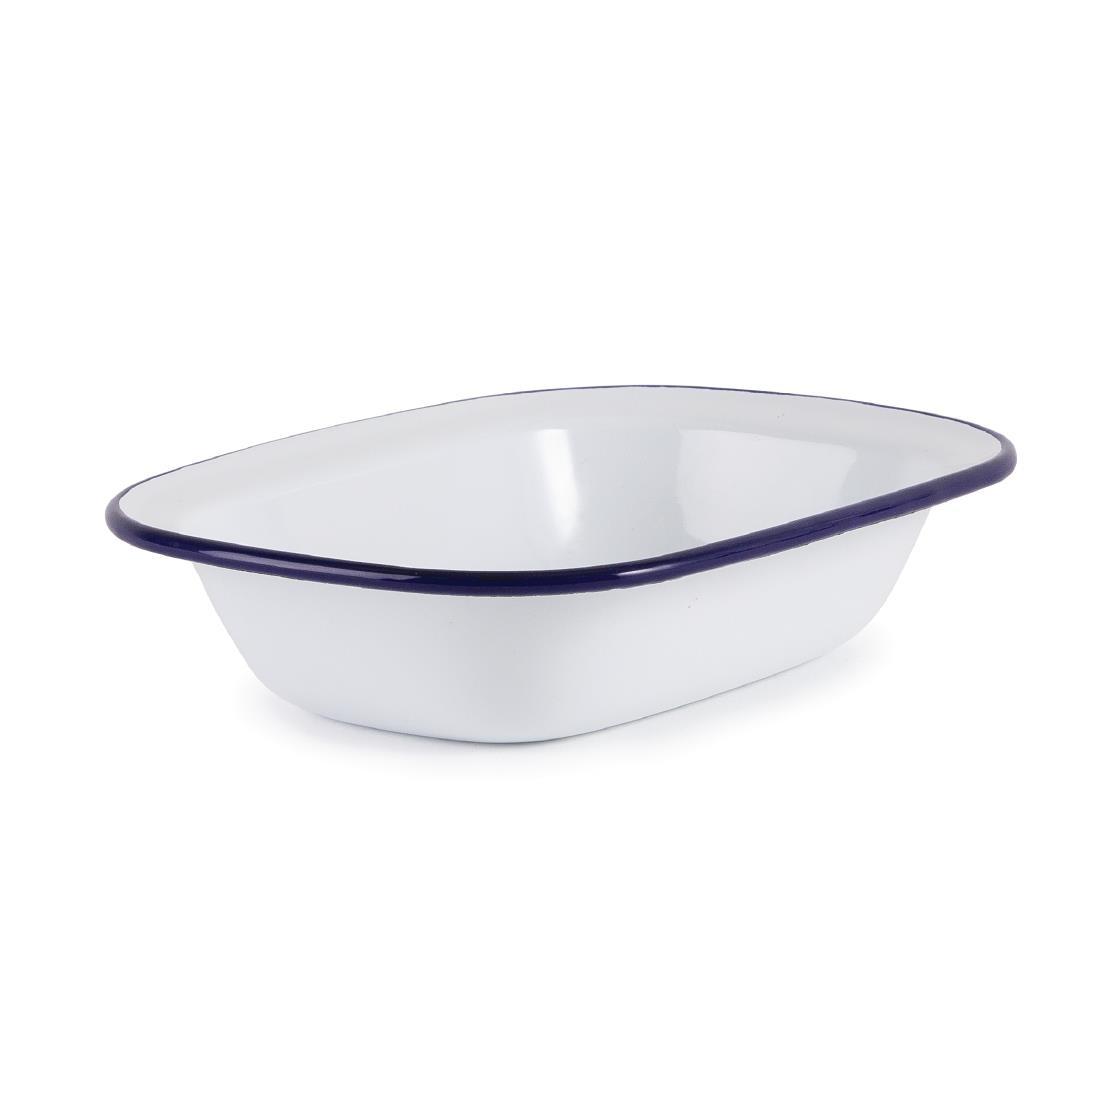 Olympia Enamel Pie Dishes Rectangular 180 x 135mm (Pack of 6) - GM511  - 6